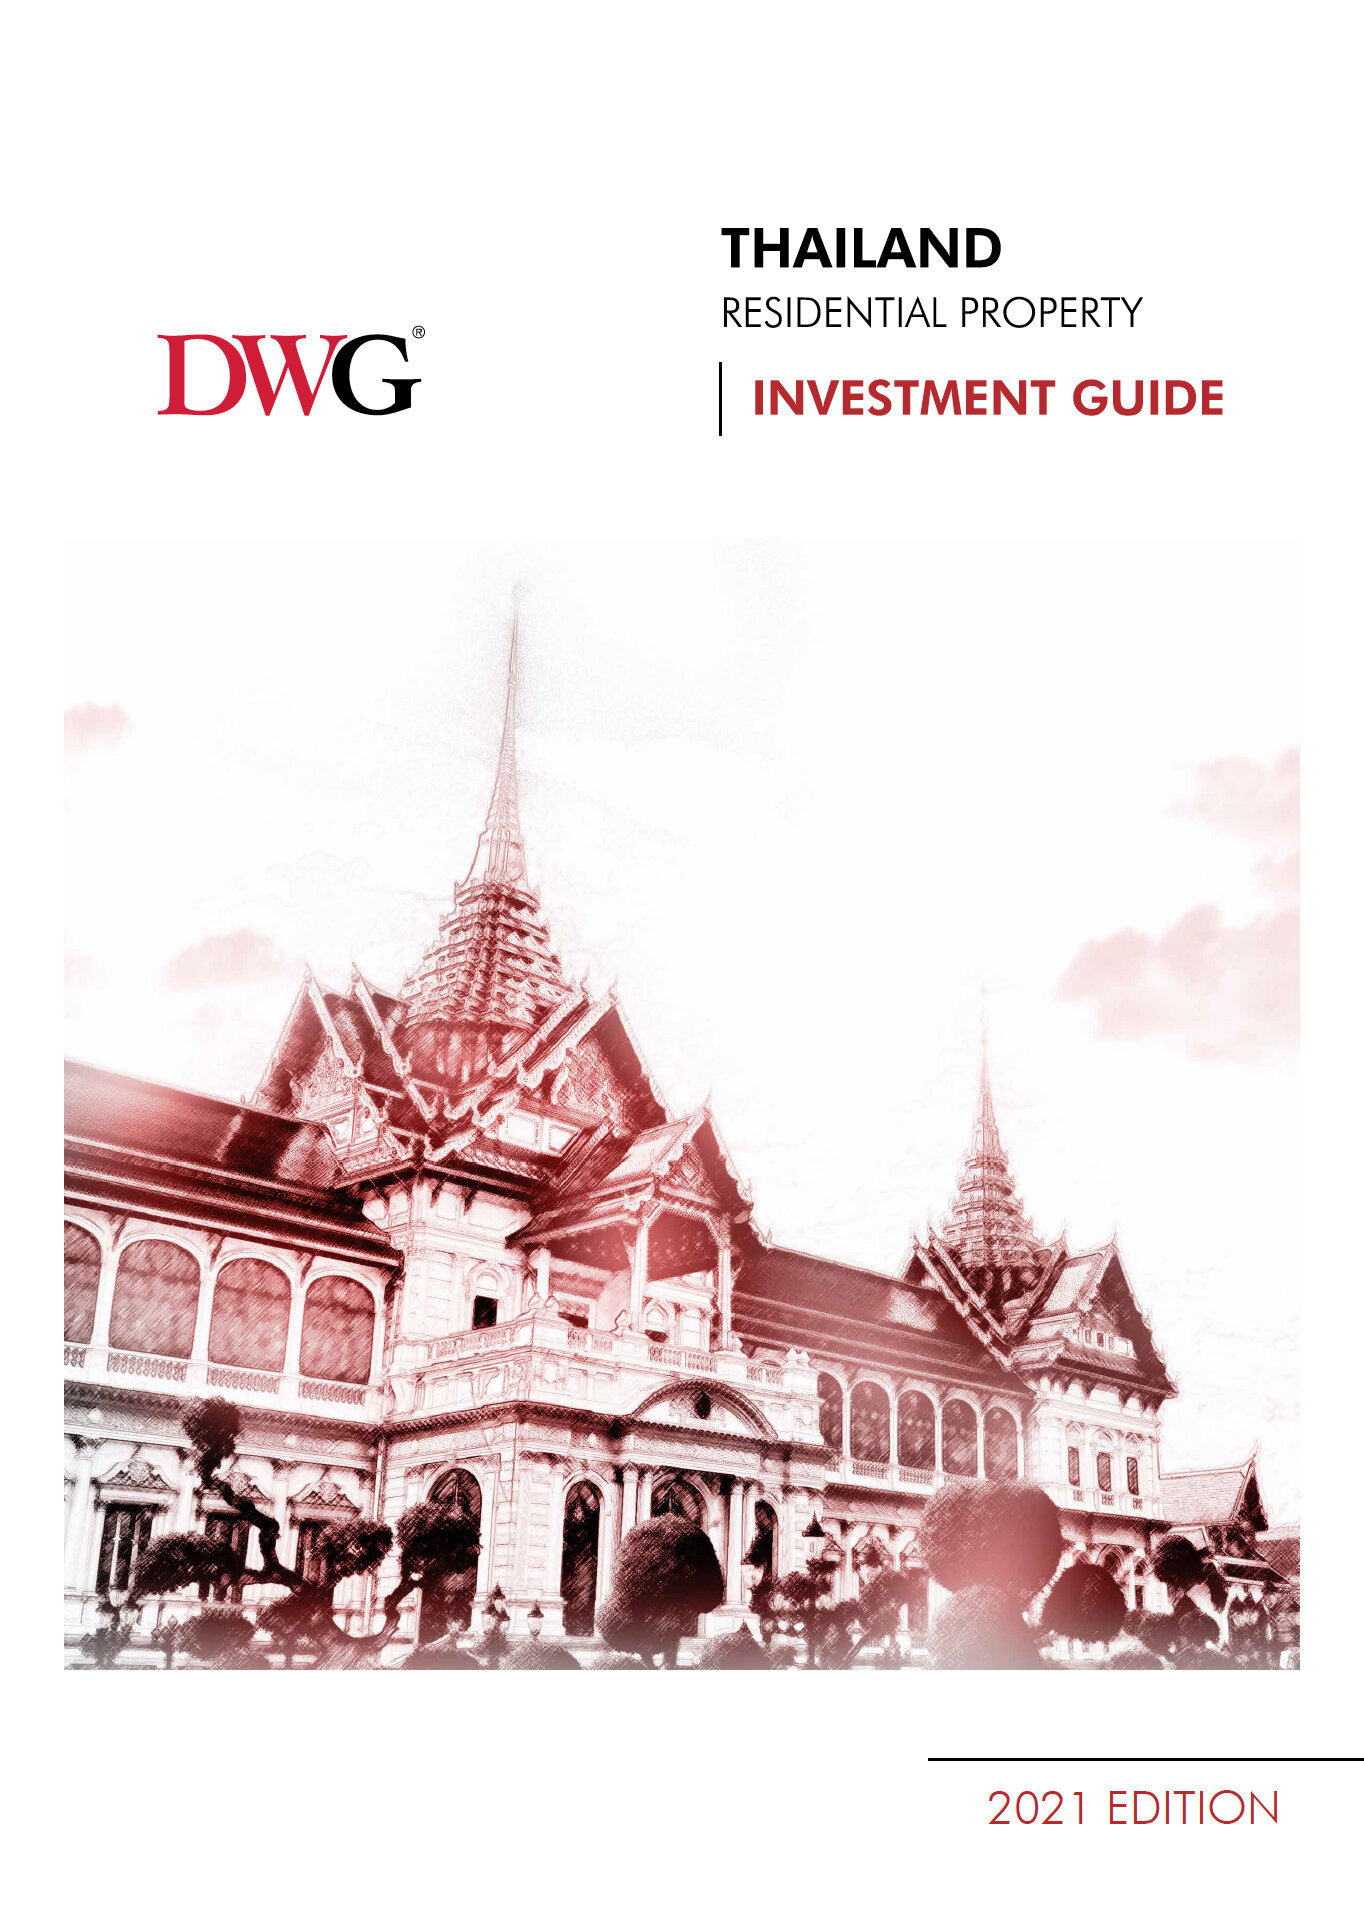 Thailand Investment Guide 2021